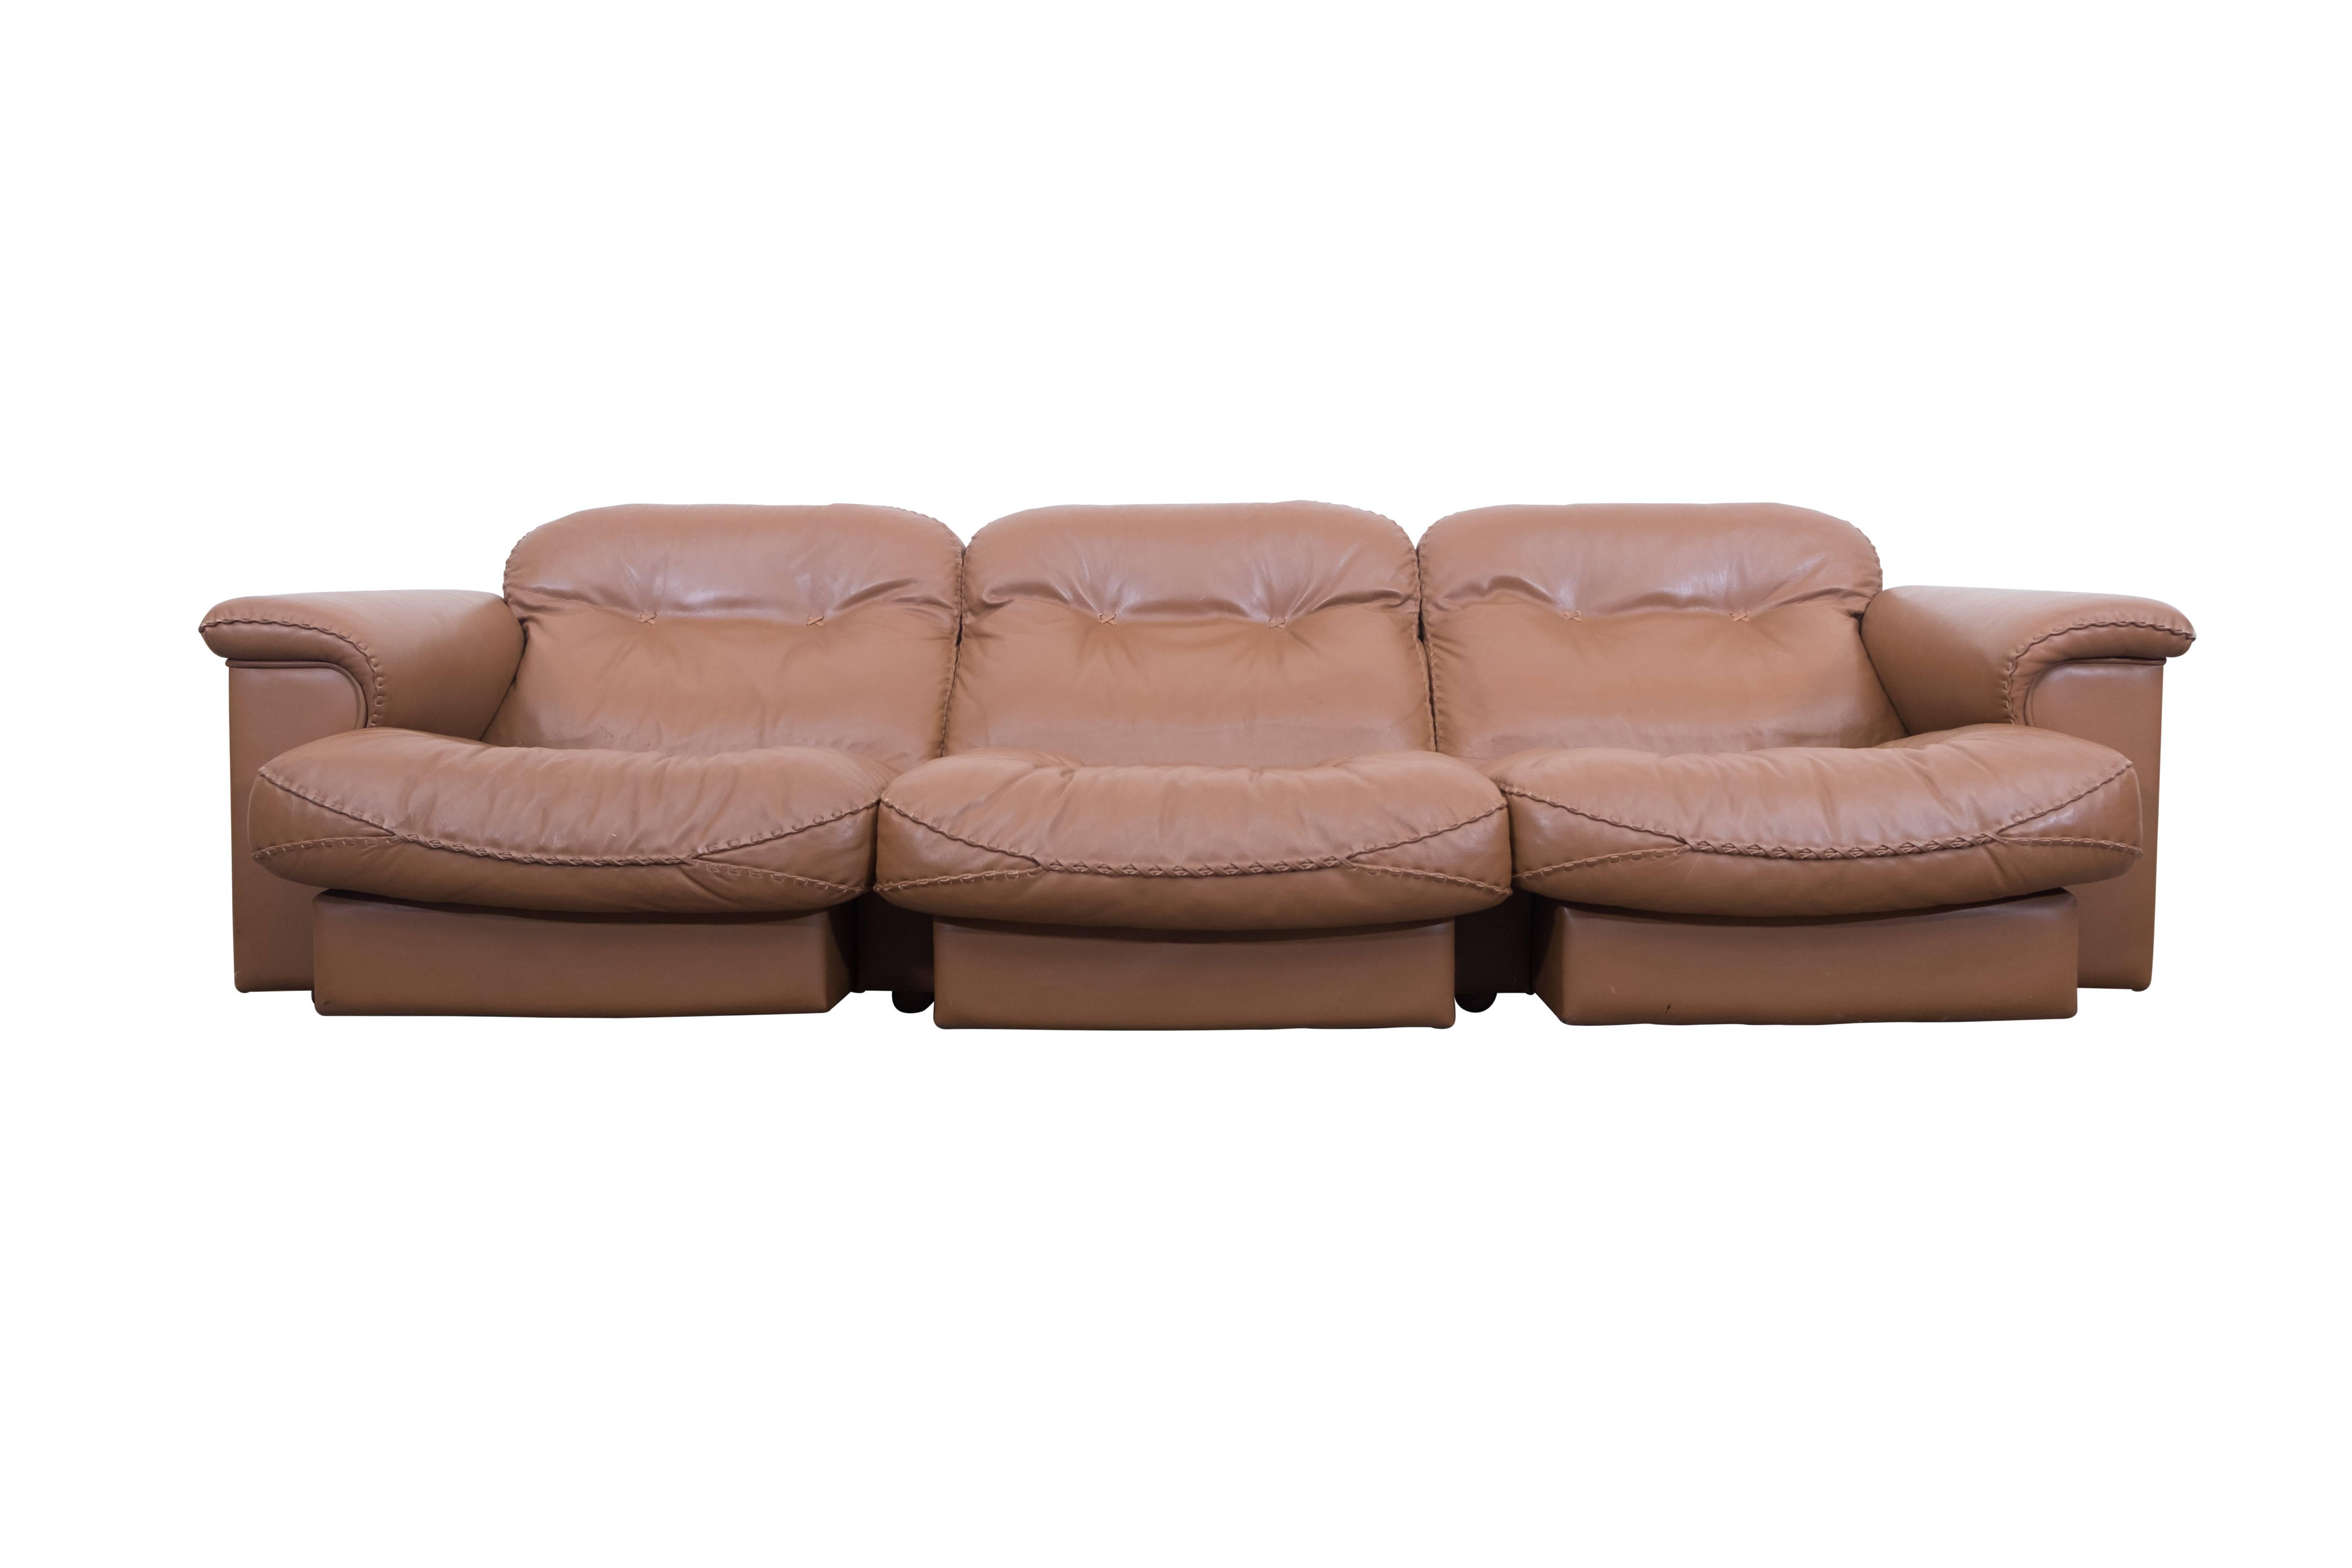 James Bond Cognac leather DS 101 Sofa by De Sede

Adjustable and very comfortable sofa by De Sede, Swiss, 1960s
The chairs are upholstered in very high quality leather and finished with interesting
thick stitched seams.

Side note:
The De Sede DS